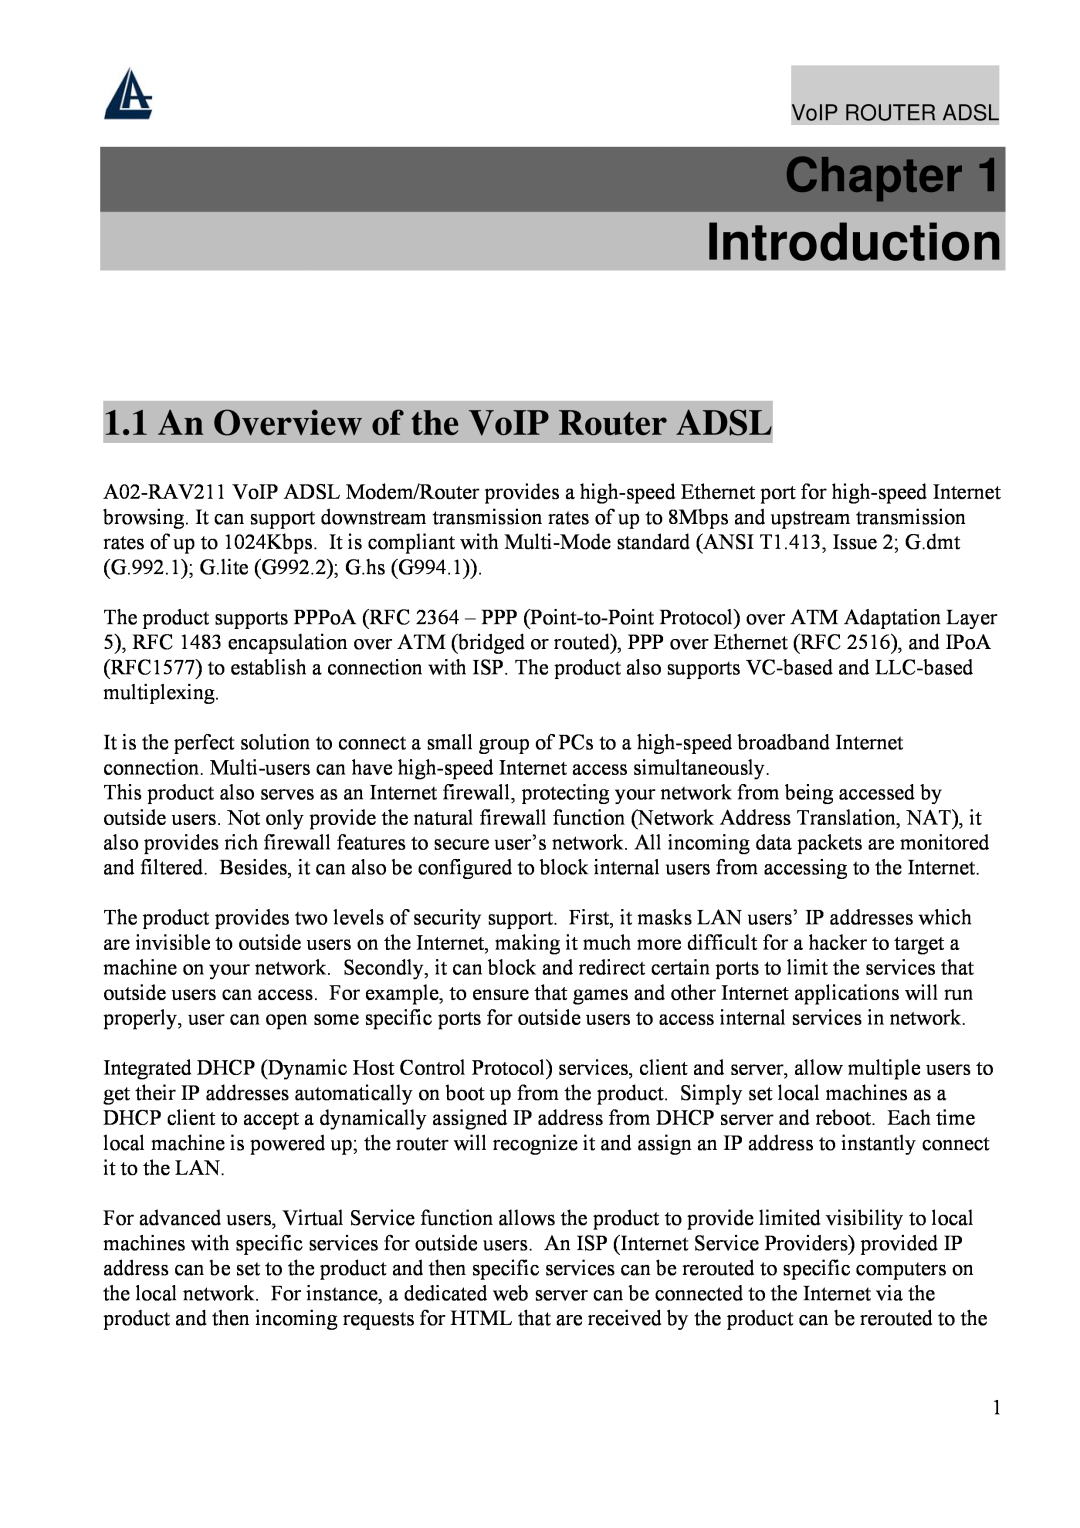 Atlantis Land A02-RAV211 manual Introduction, Chapter, An Overview of the VoIP Router ADSL 